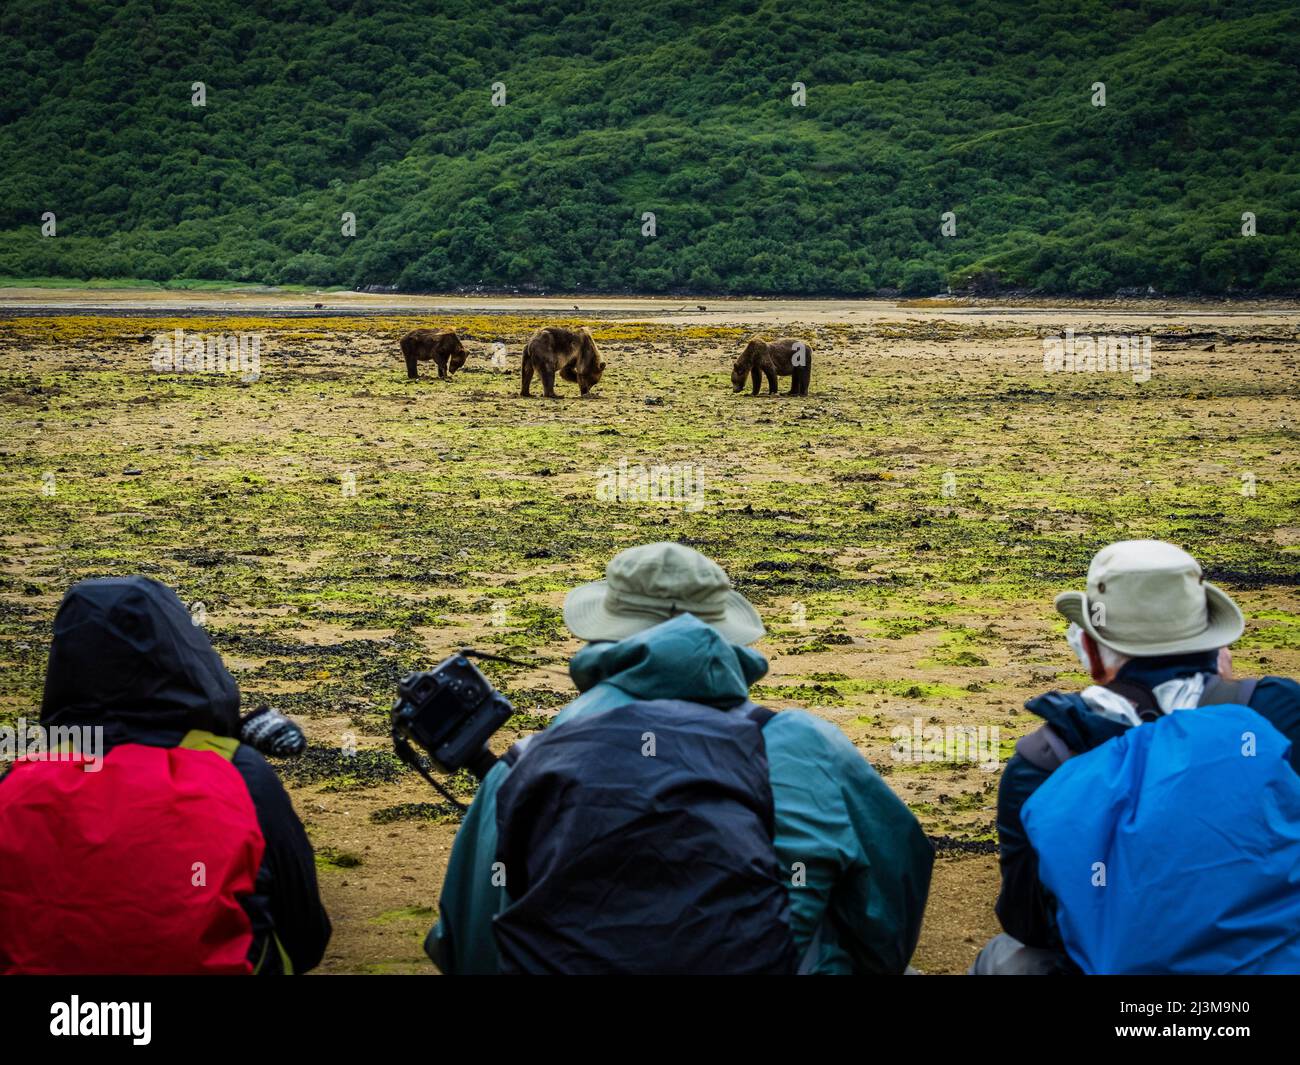 Bear watching, Coastal Brown Bears (Ursus arctos horribilis) grazing for clams at low tide in Geographic Harbor, Katmai National Park and Preserve Stock Photo